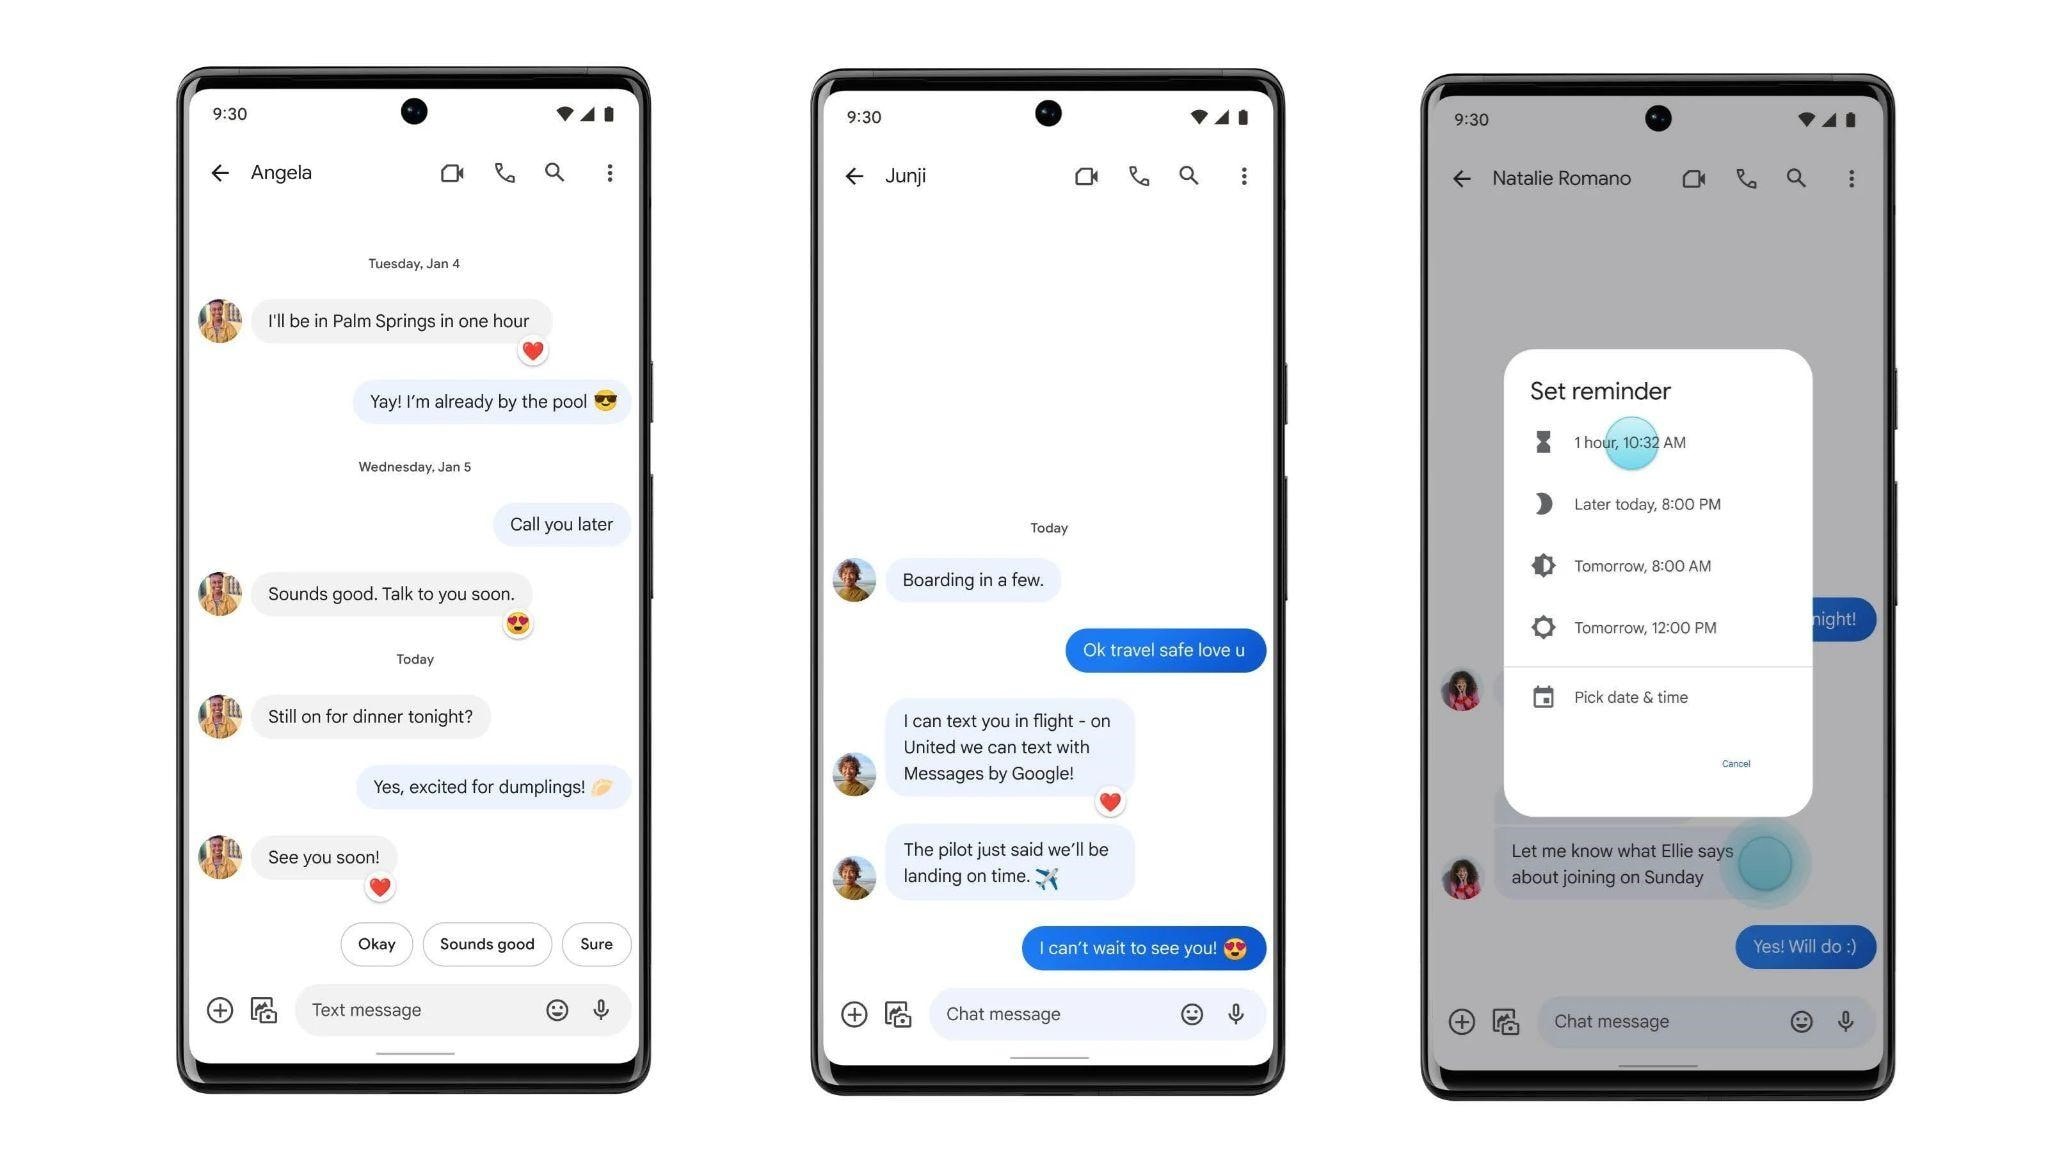 Google Messages May Soon Allow Chat Reactions Akin to Instagram